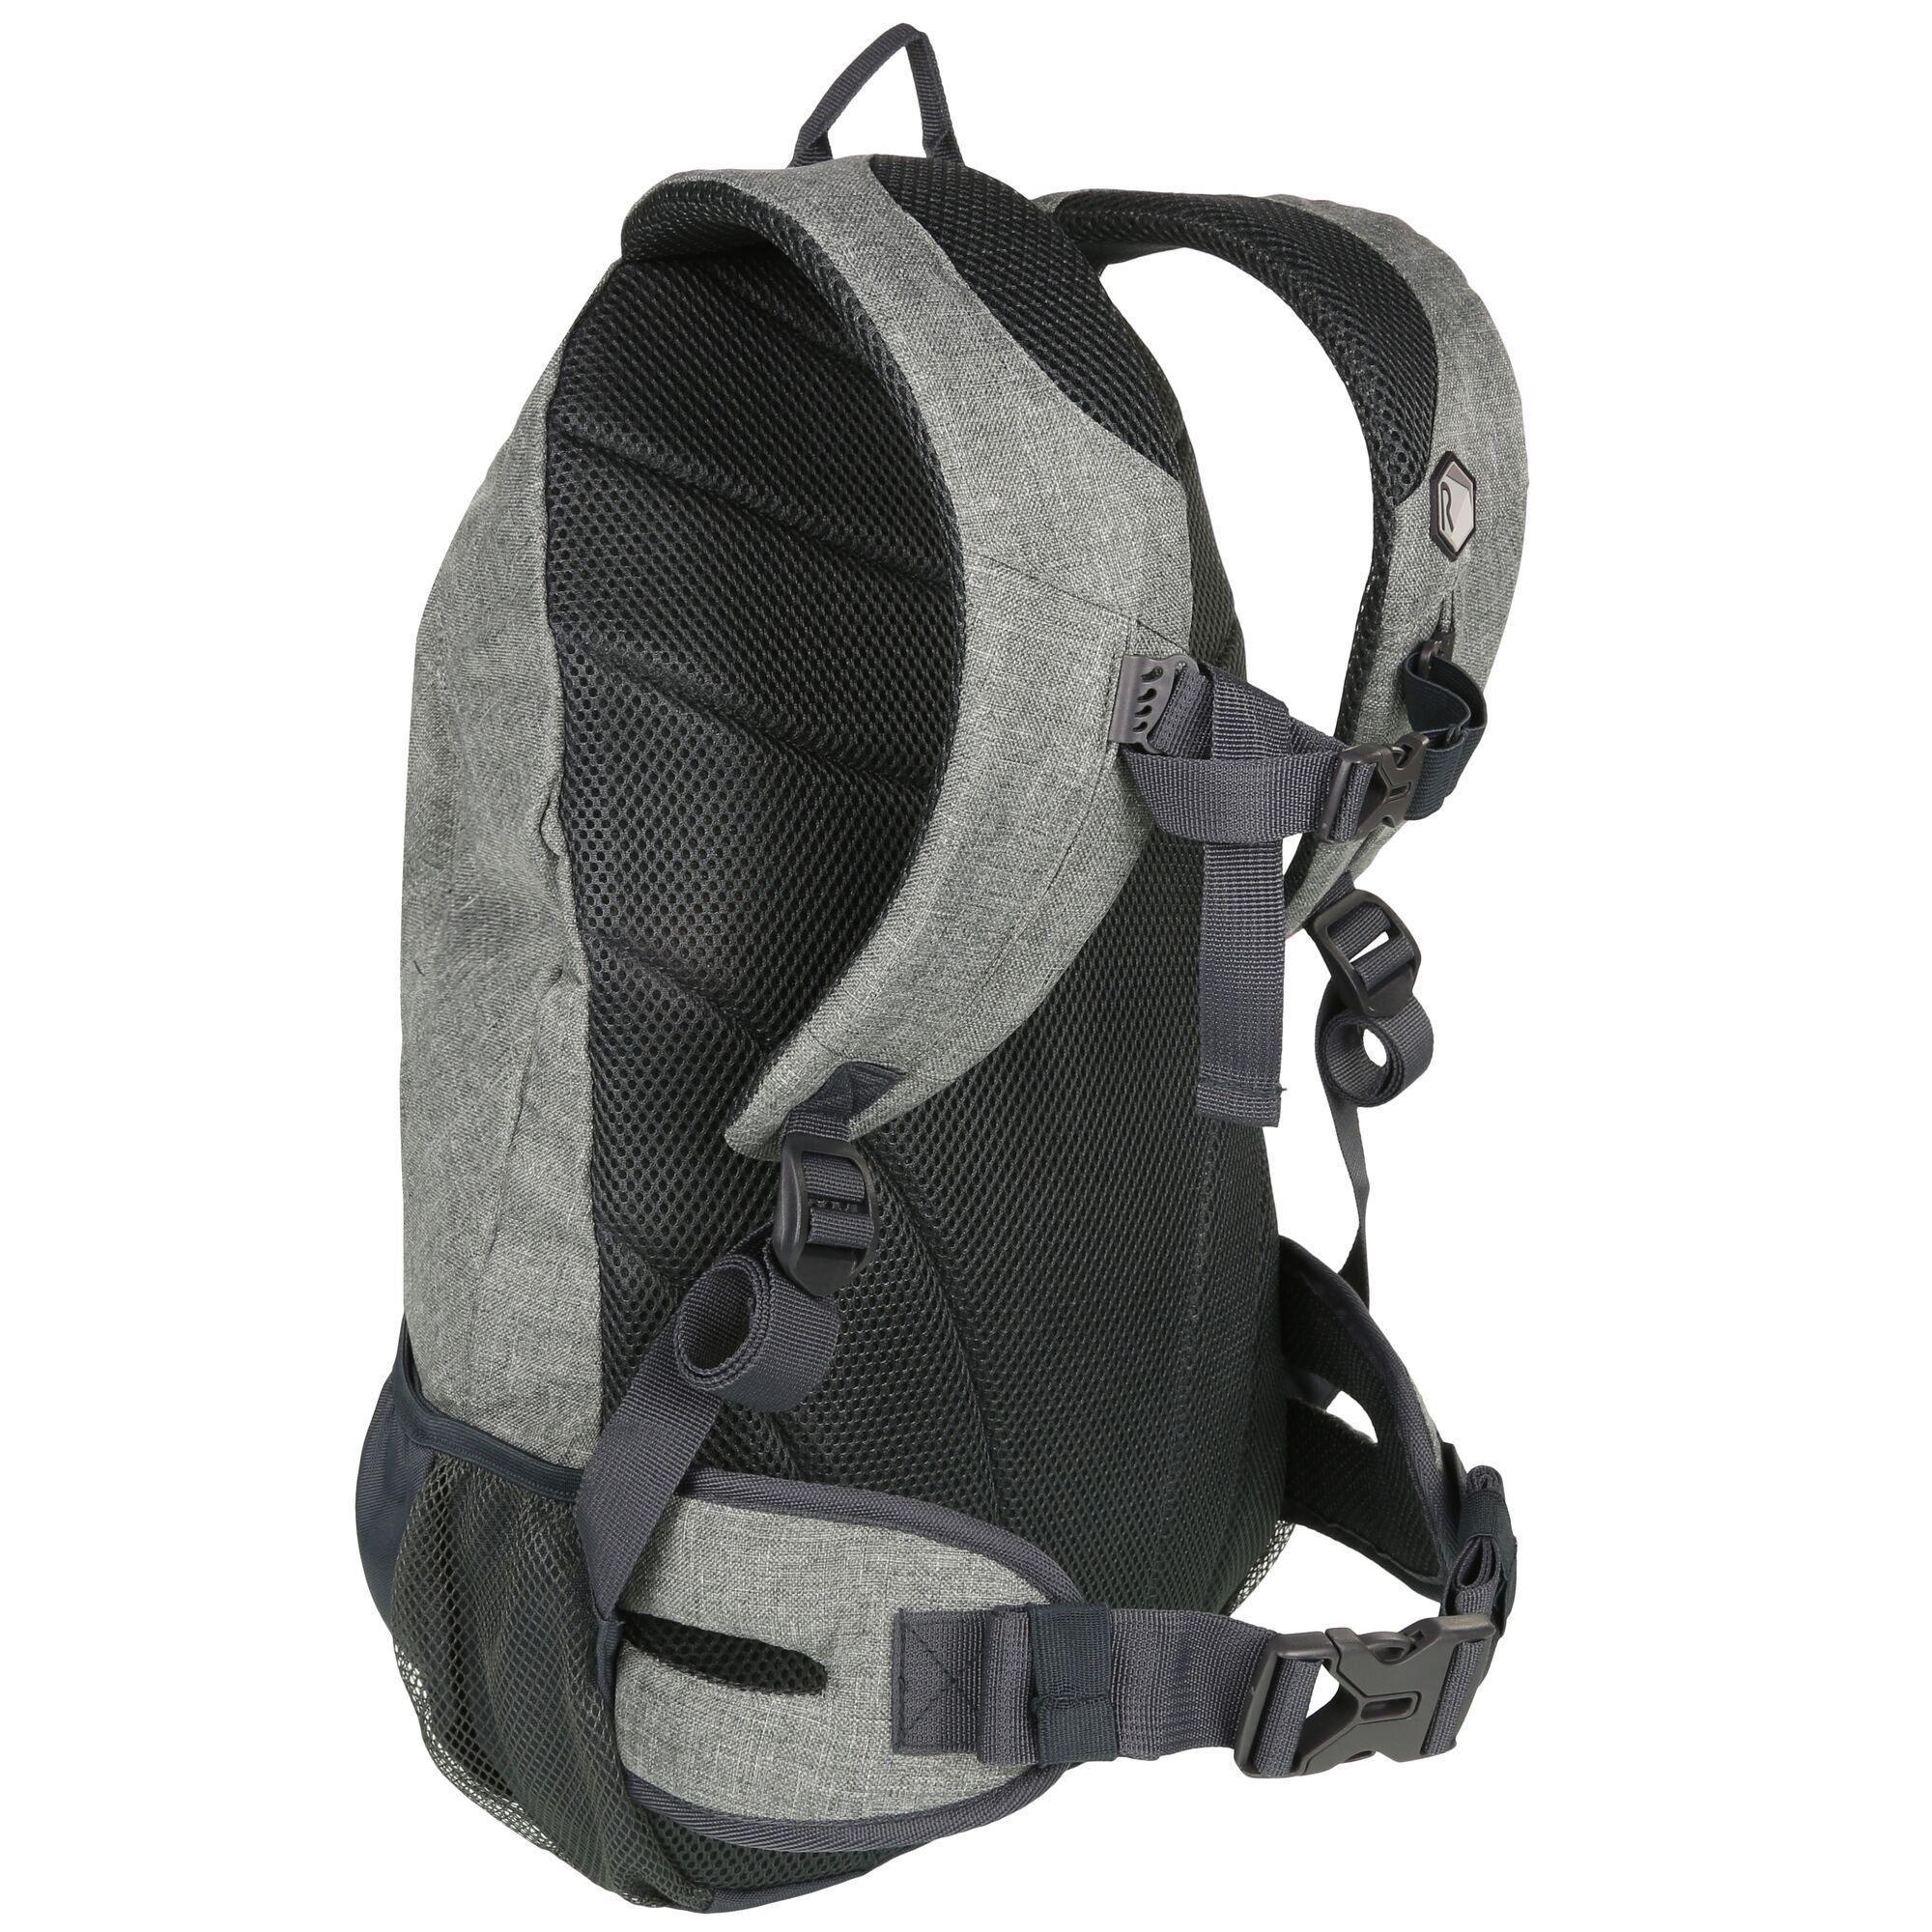 35 litre capacity. Hardwearing 600D polyester. Air mesh back construction to allow ventilated airflow. Air mesh cushioned hip belt. Adjustable sliding chest harness. Bungee on the front offers additional storage. Easy grab zip pullers. Zipped front pocket. Internal key clip. Side mesh water bottle pockets. Internal security pocket. Reflective trim.